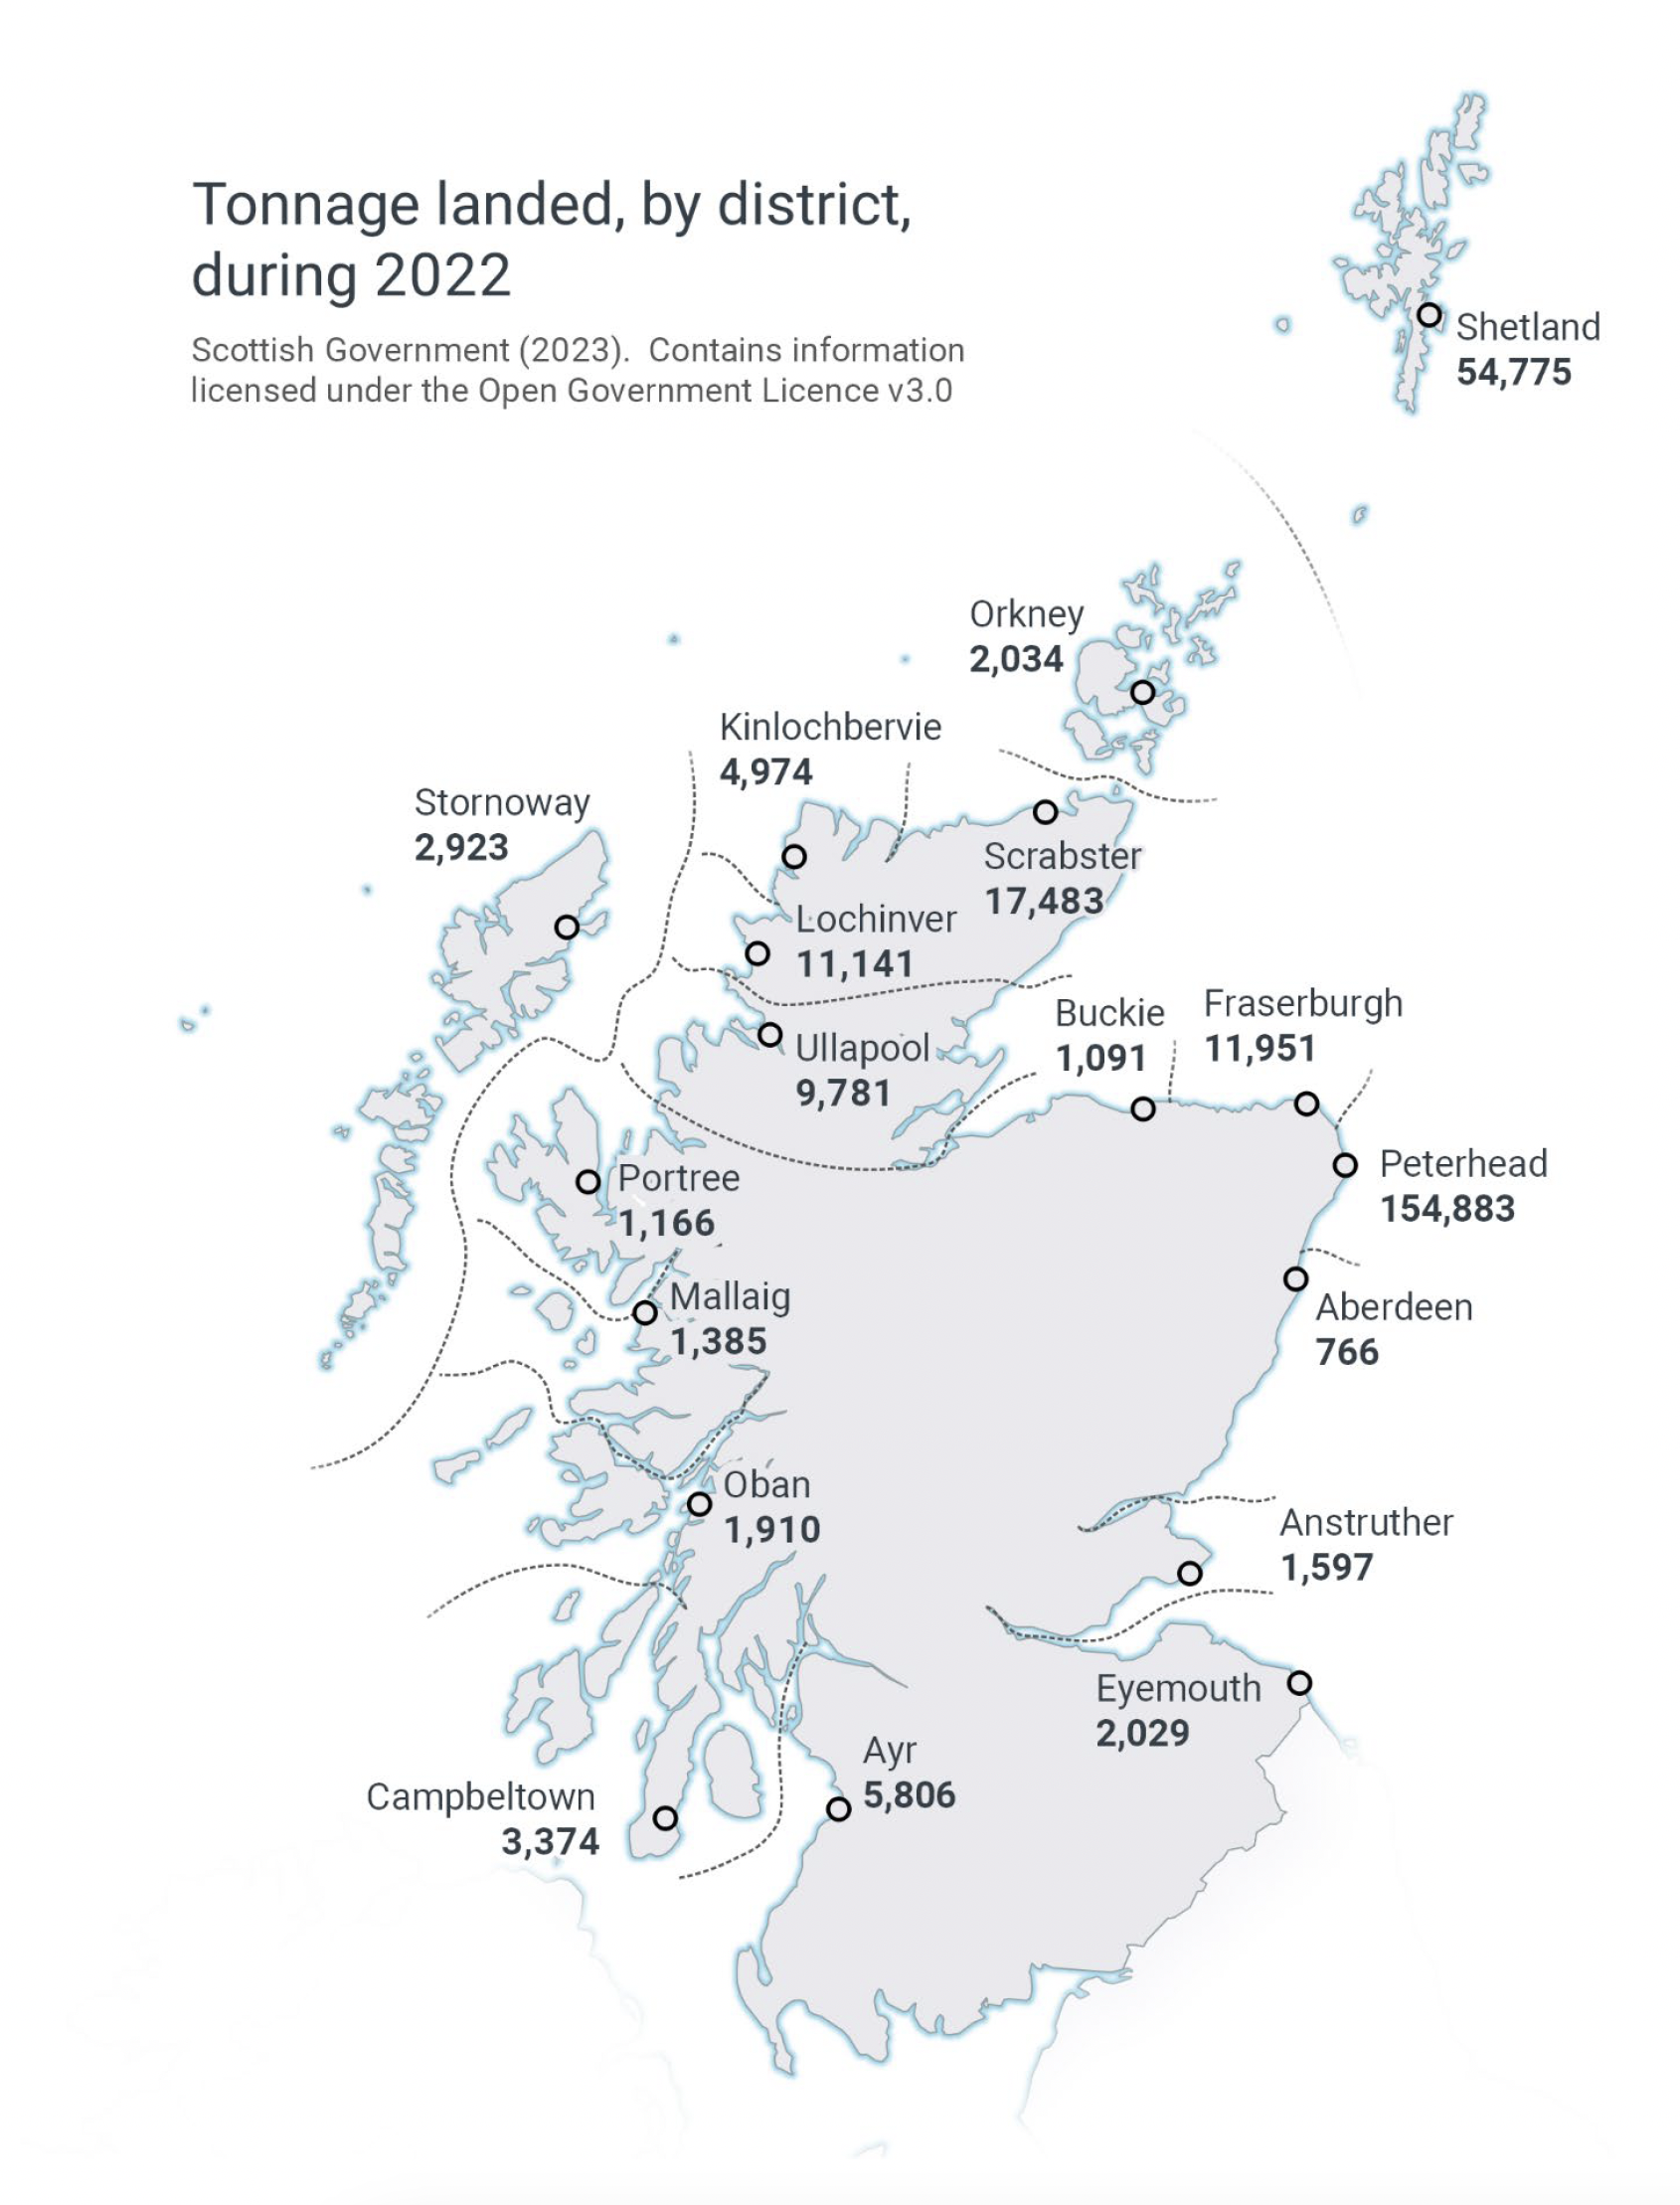 A map showing the tonnage of fish landed into Scotland by all vessels by district in 2022. The map shows that the district with the largest tonnage of fish landed into was Peterhead with 154,883 tonnes landed. 